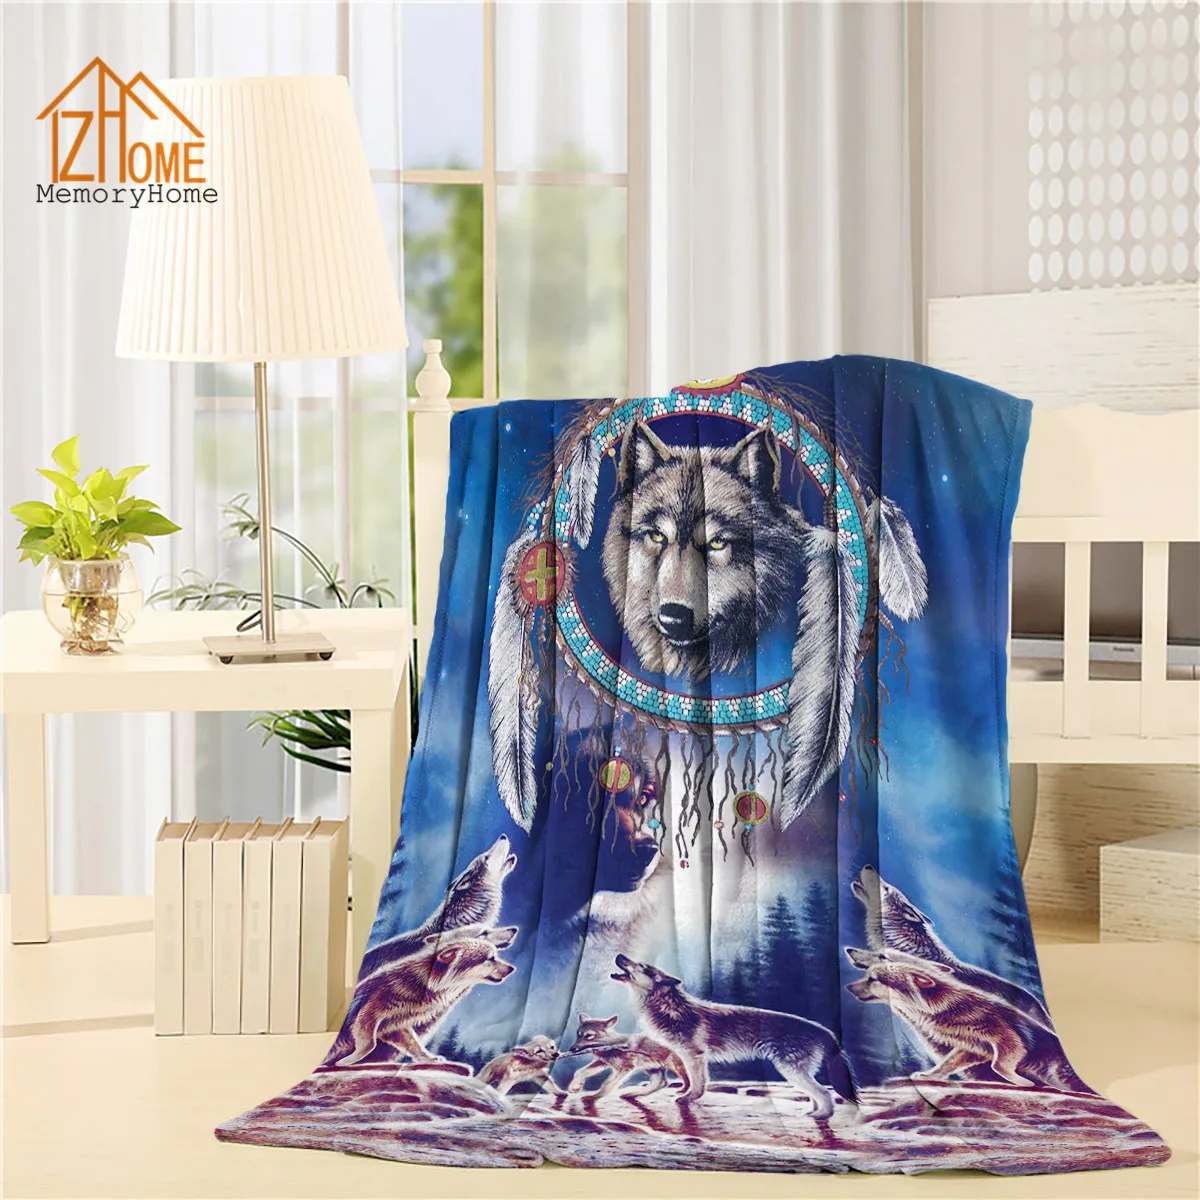 Memory Home Personalized Fleece Blanket Throw Cool Wolf Dream ...